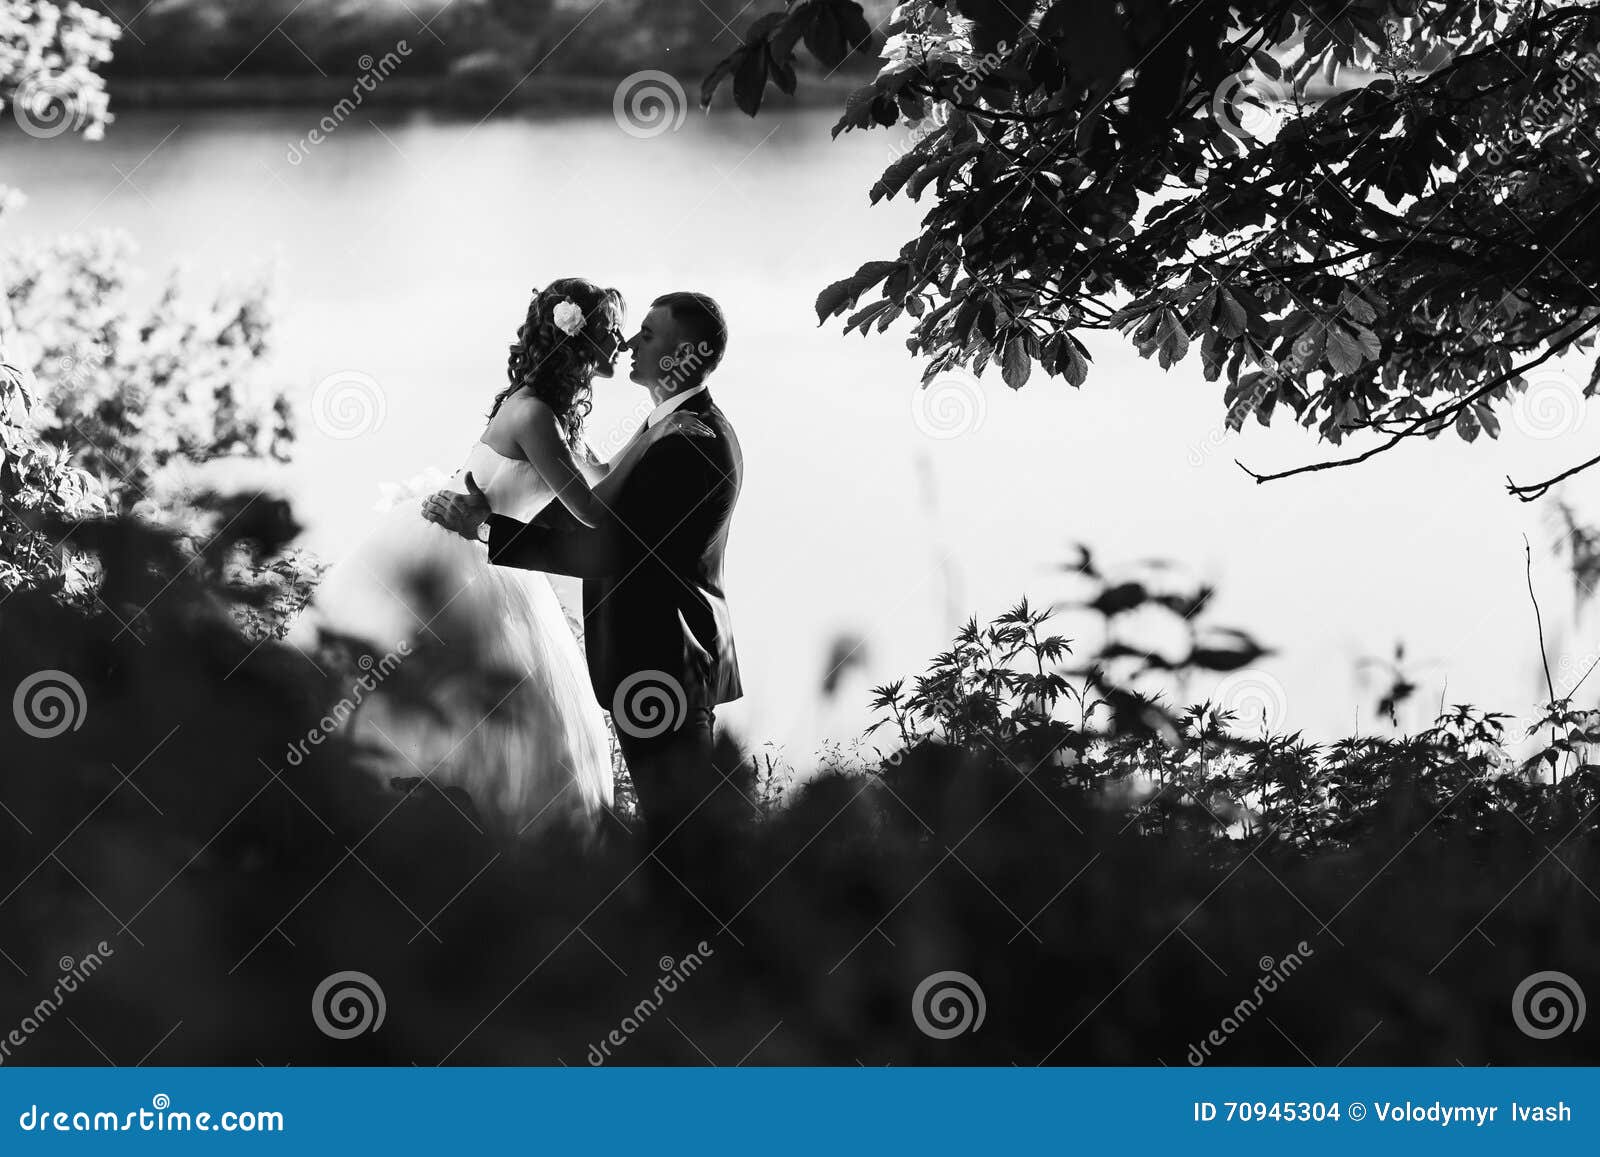 groom and bride on the natire - a kiss behind a lake